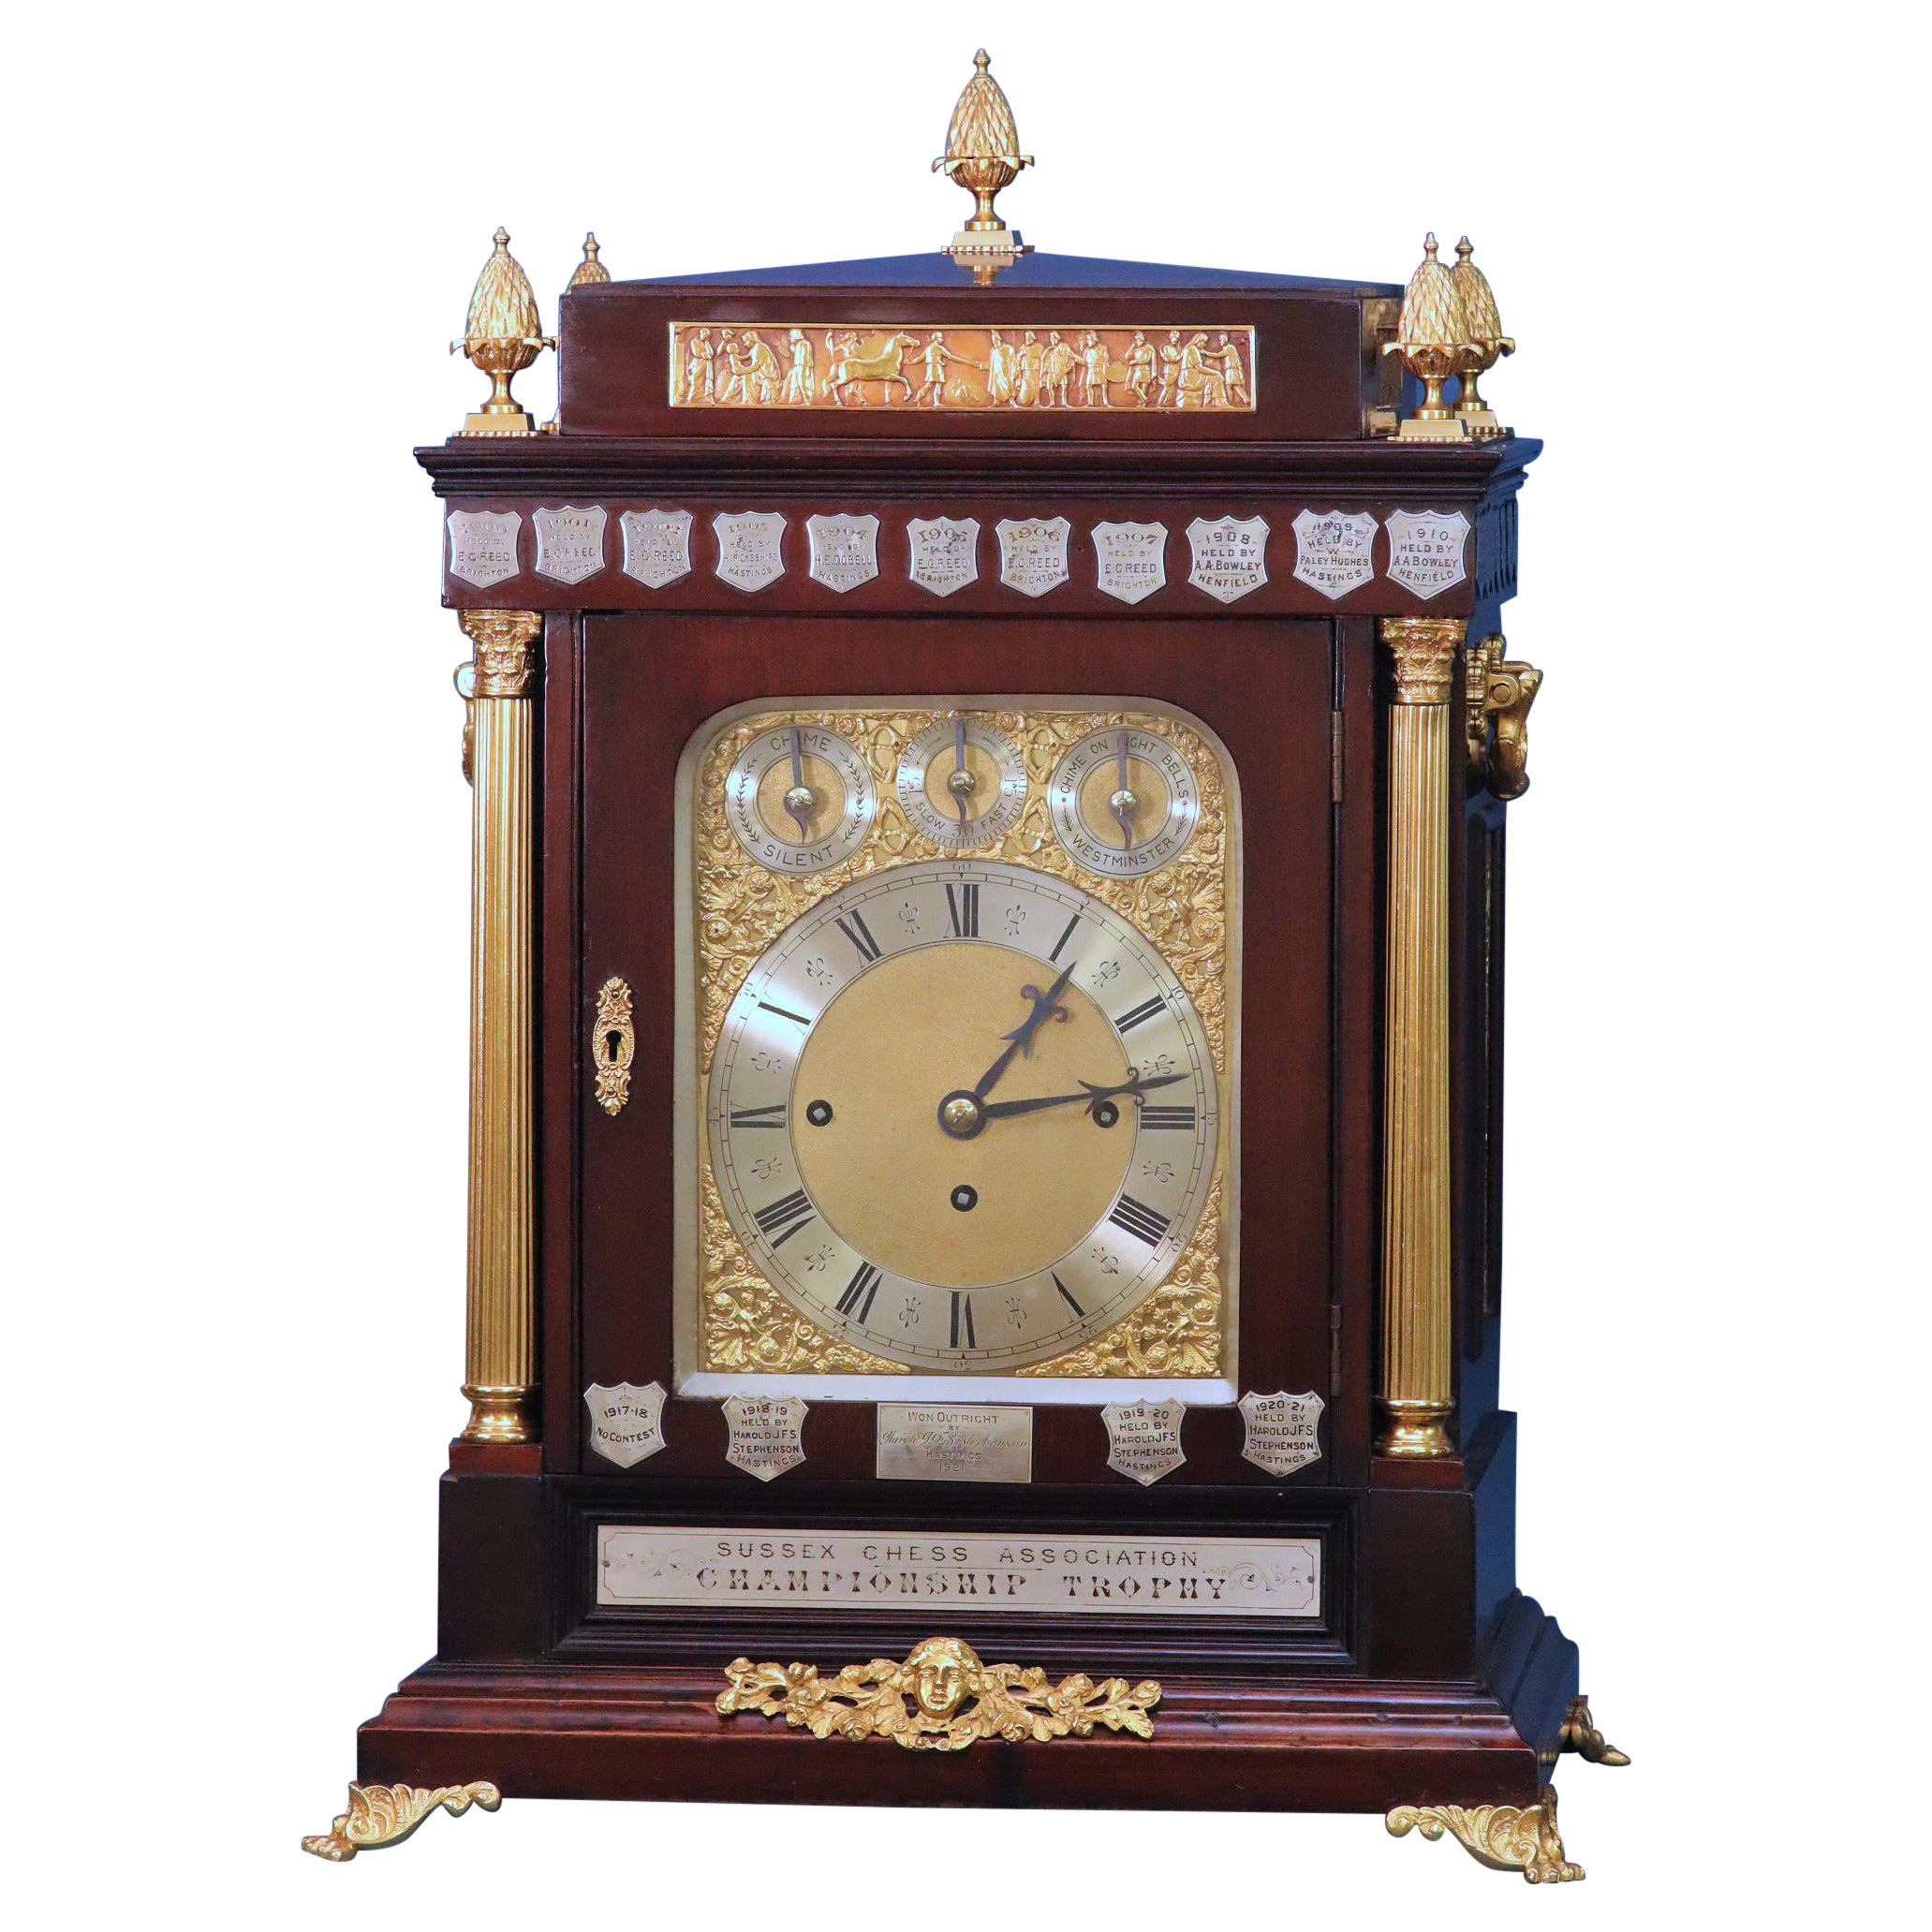 Rare Late-19th century English Chess Trophy Bracket Clock. For Sale